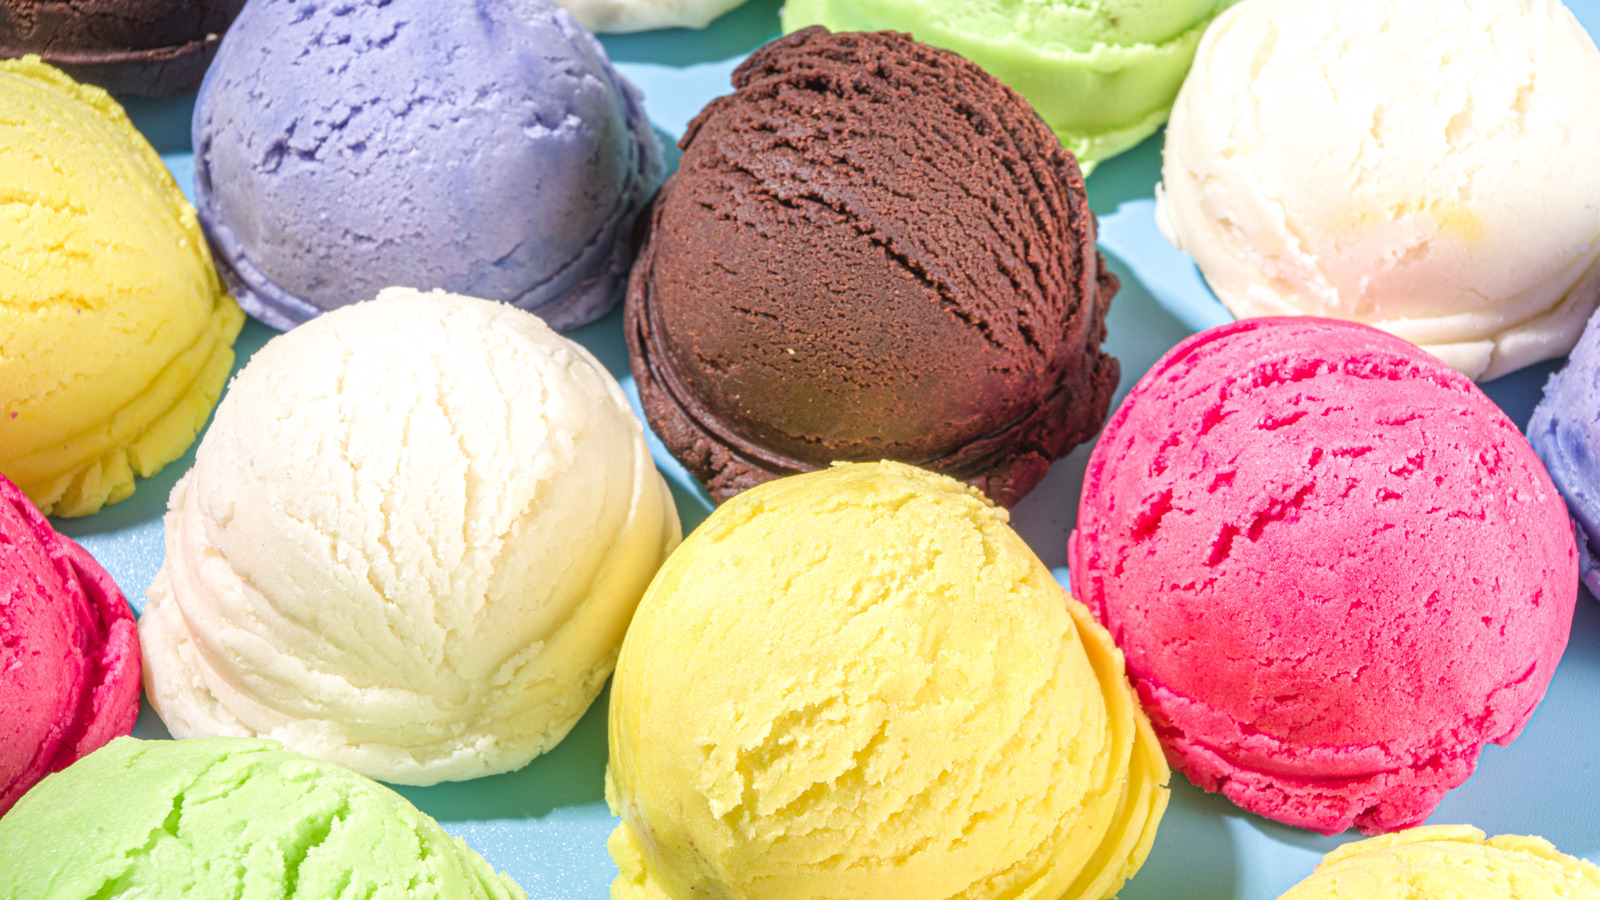 Hear Me Out: This Ice Cream Maker Practically Pays for Itself